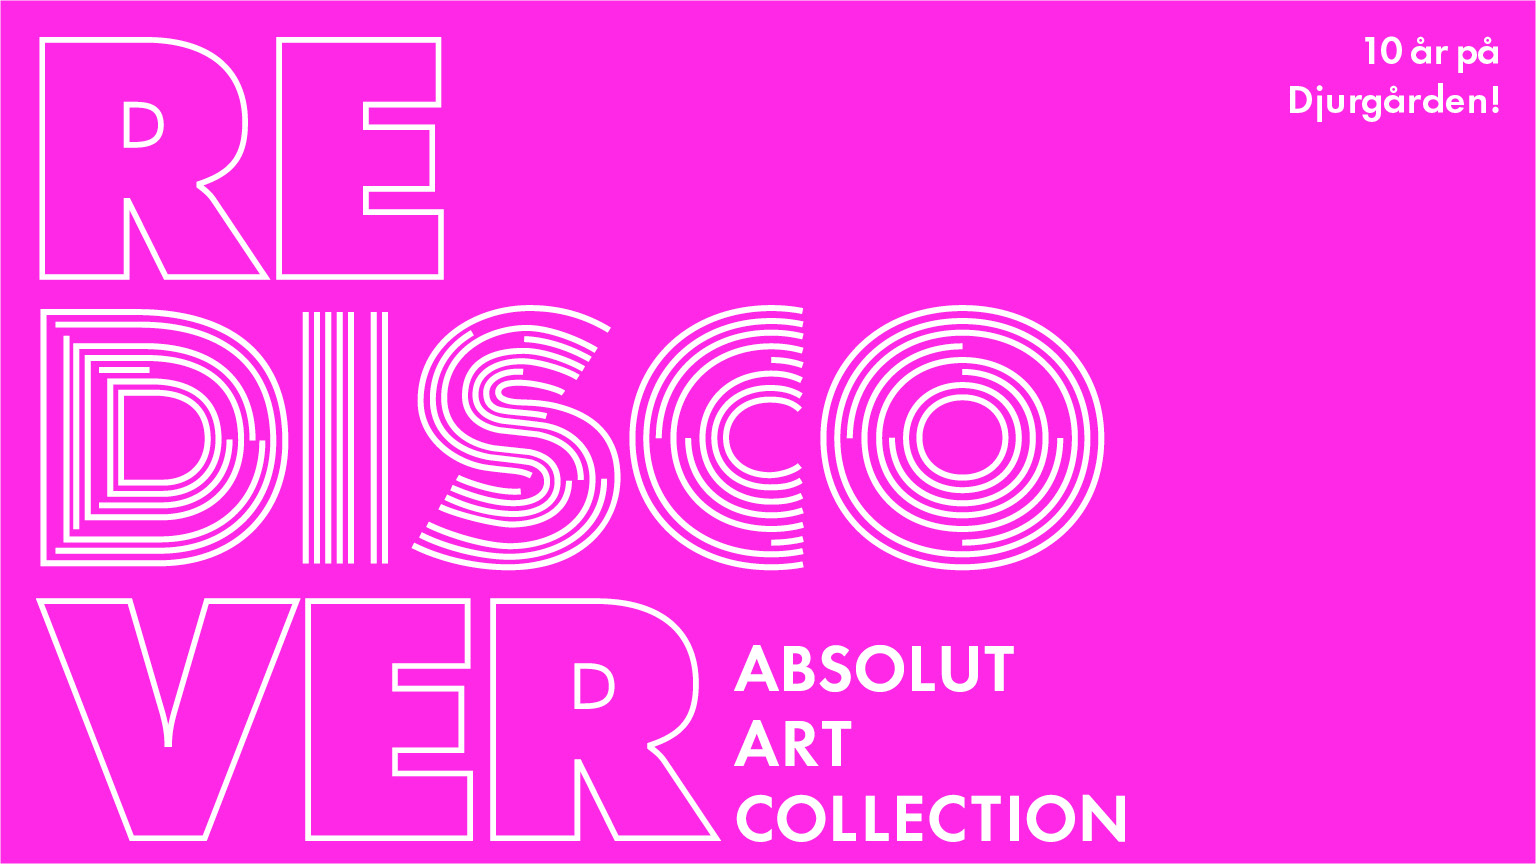 REDISCOVER Absolut Art Collection